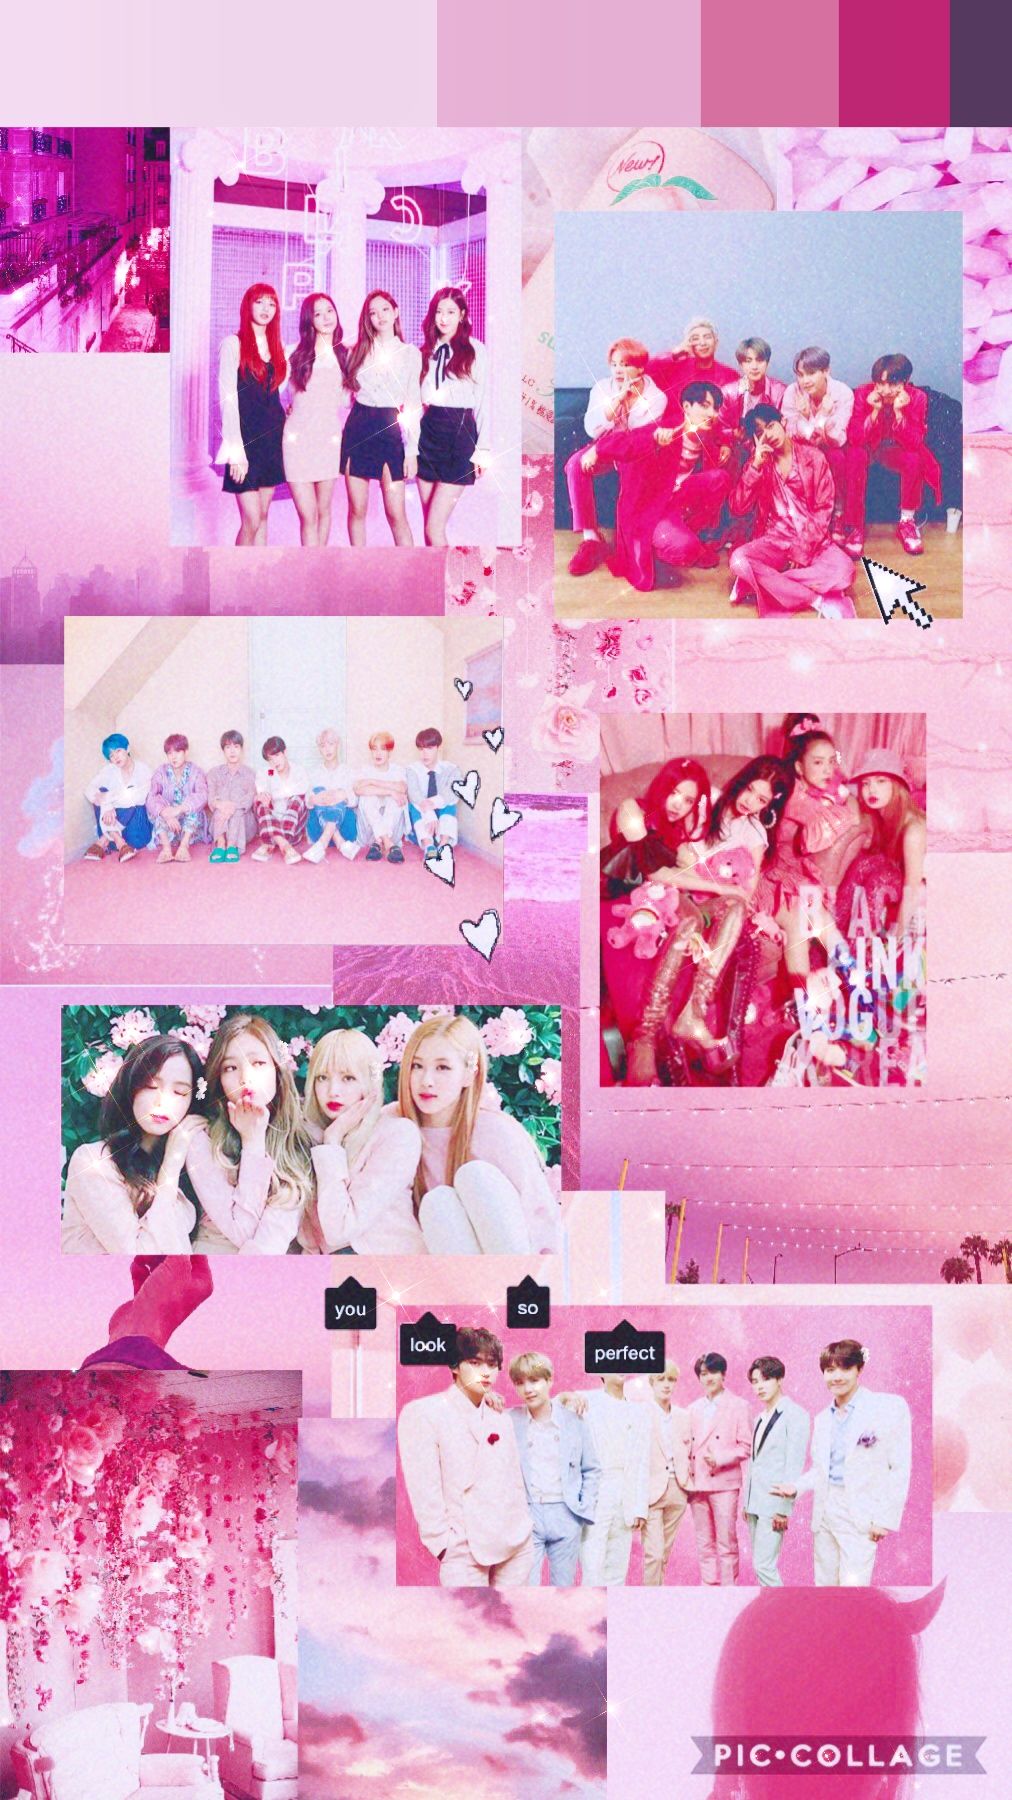 24 blackpink and BTS ideas in 2021 blackpink and bts